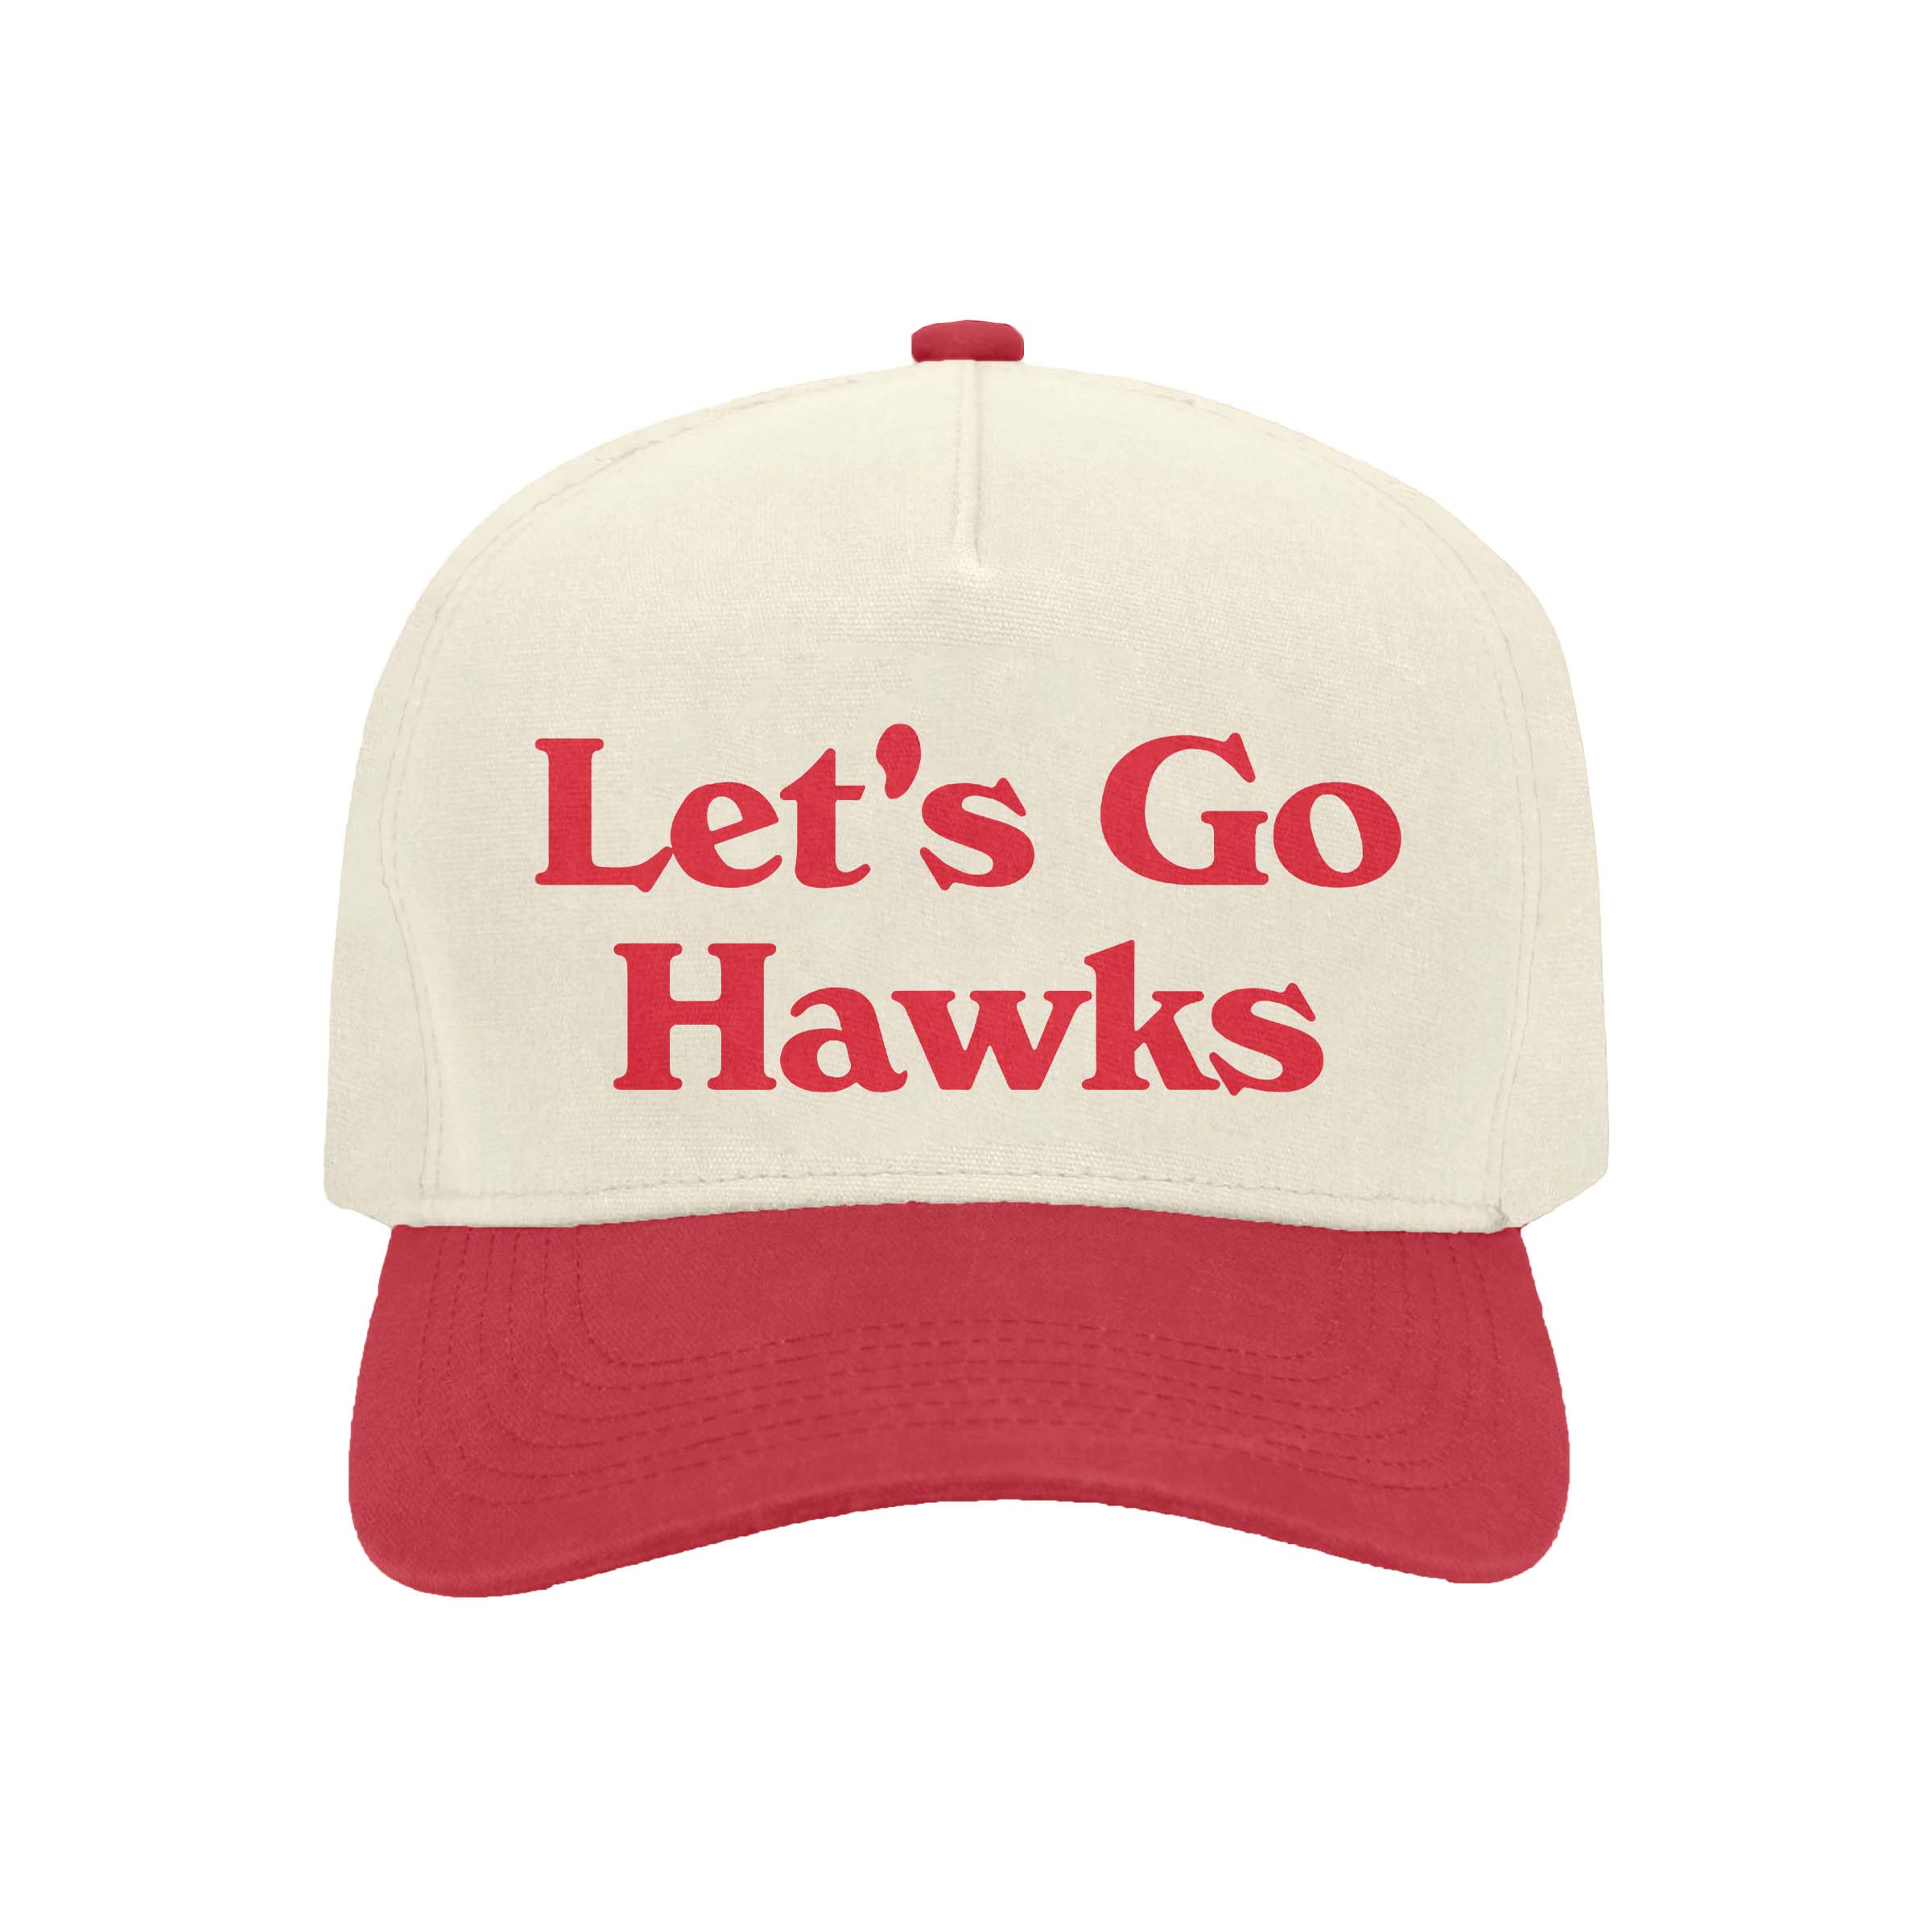 Let's Go Hawks Hat - Red